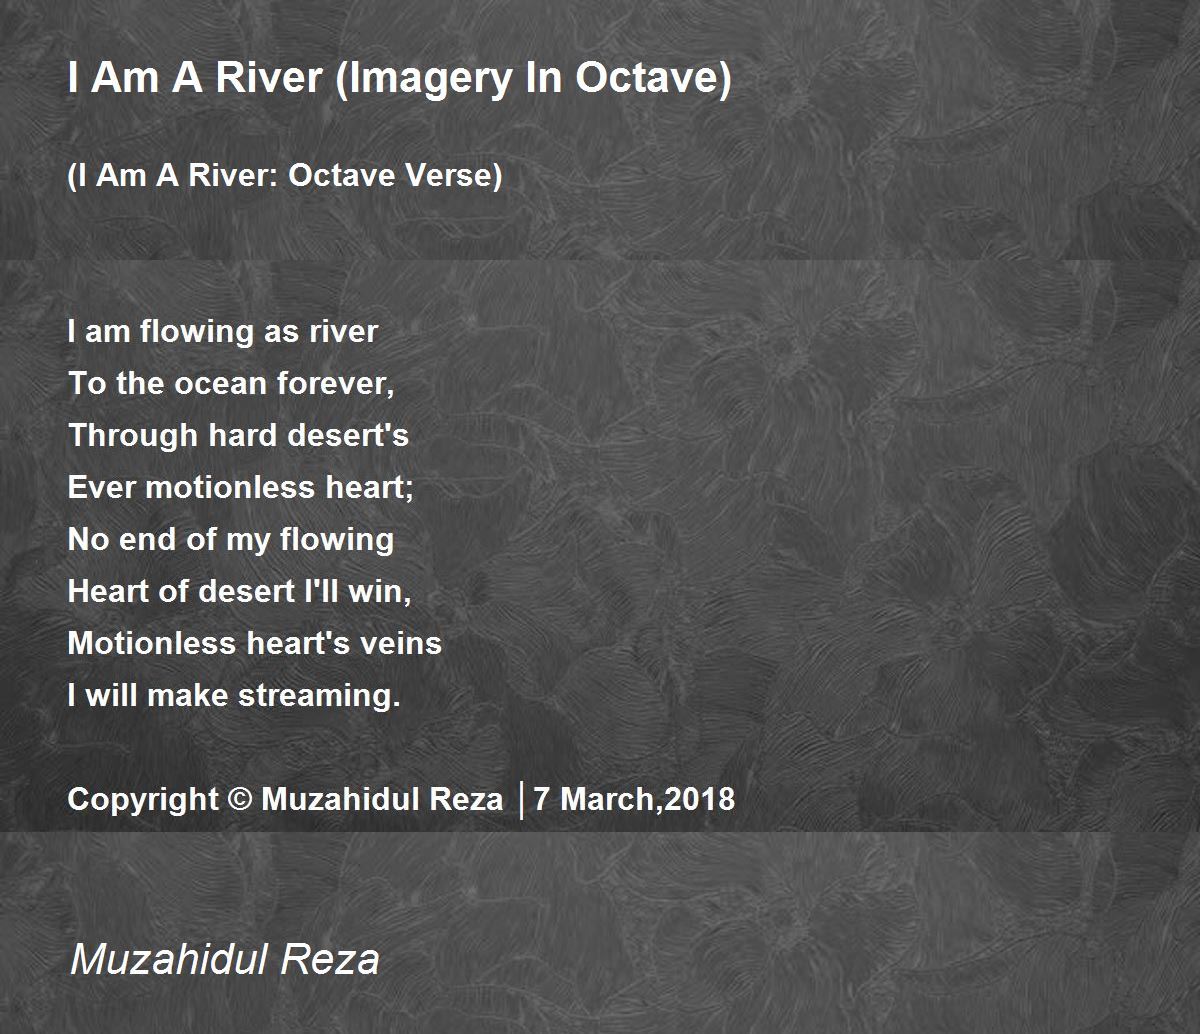 I Am A River Imagery In Octave By Muzahidul Reza I Am A River Imagery In Octave Poem